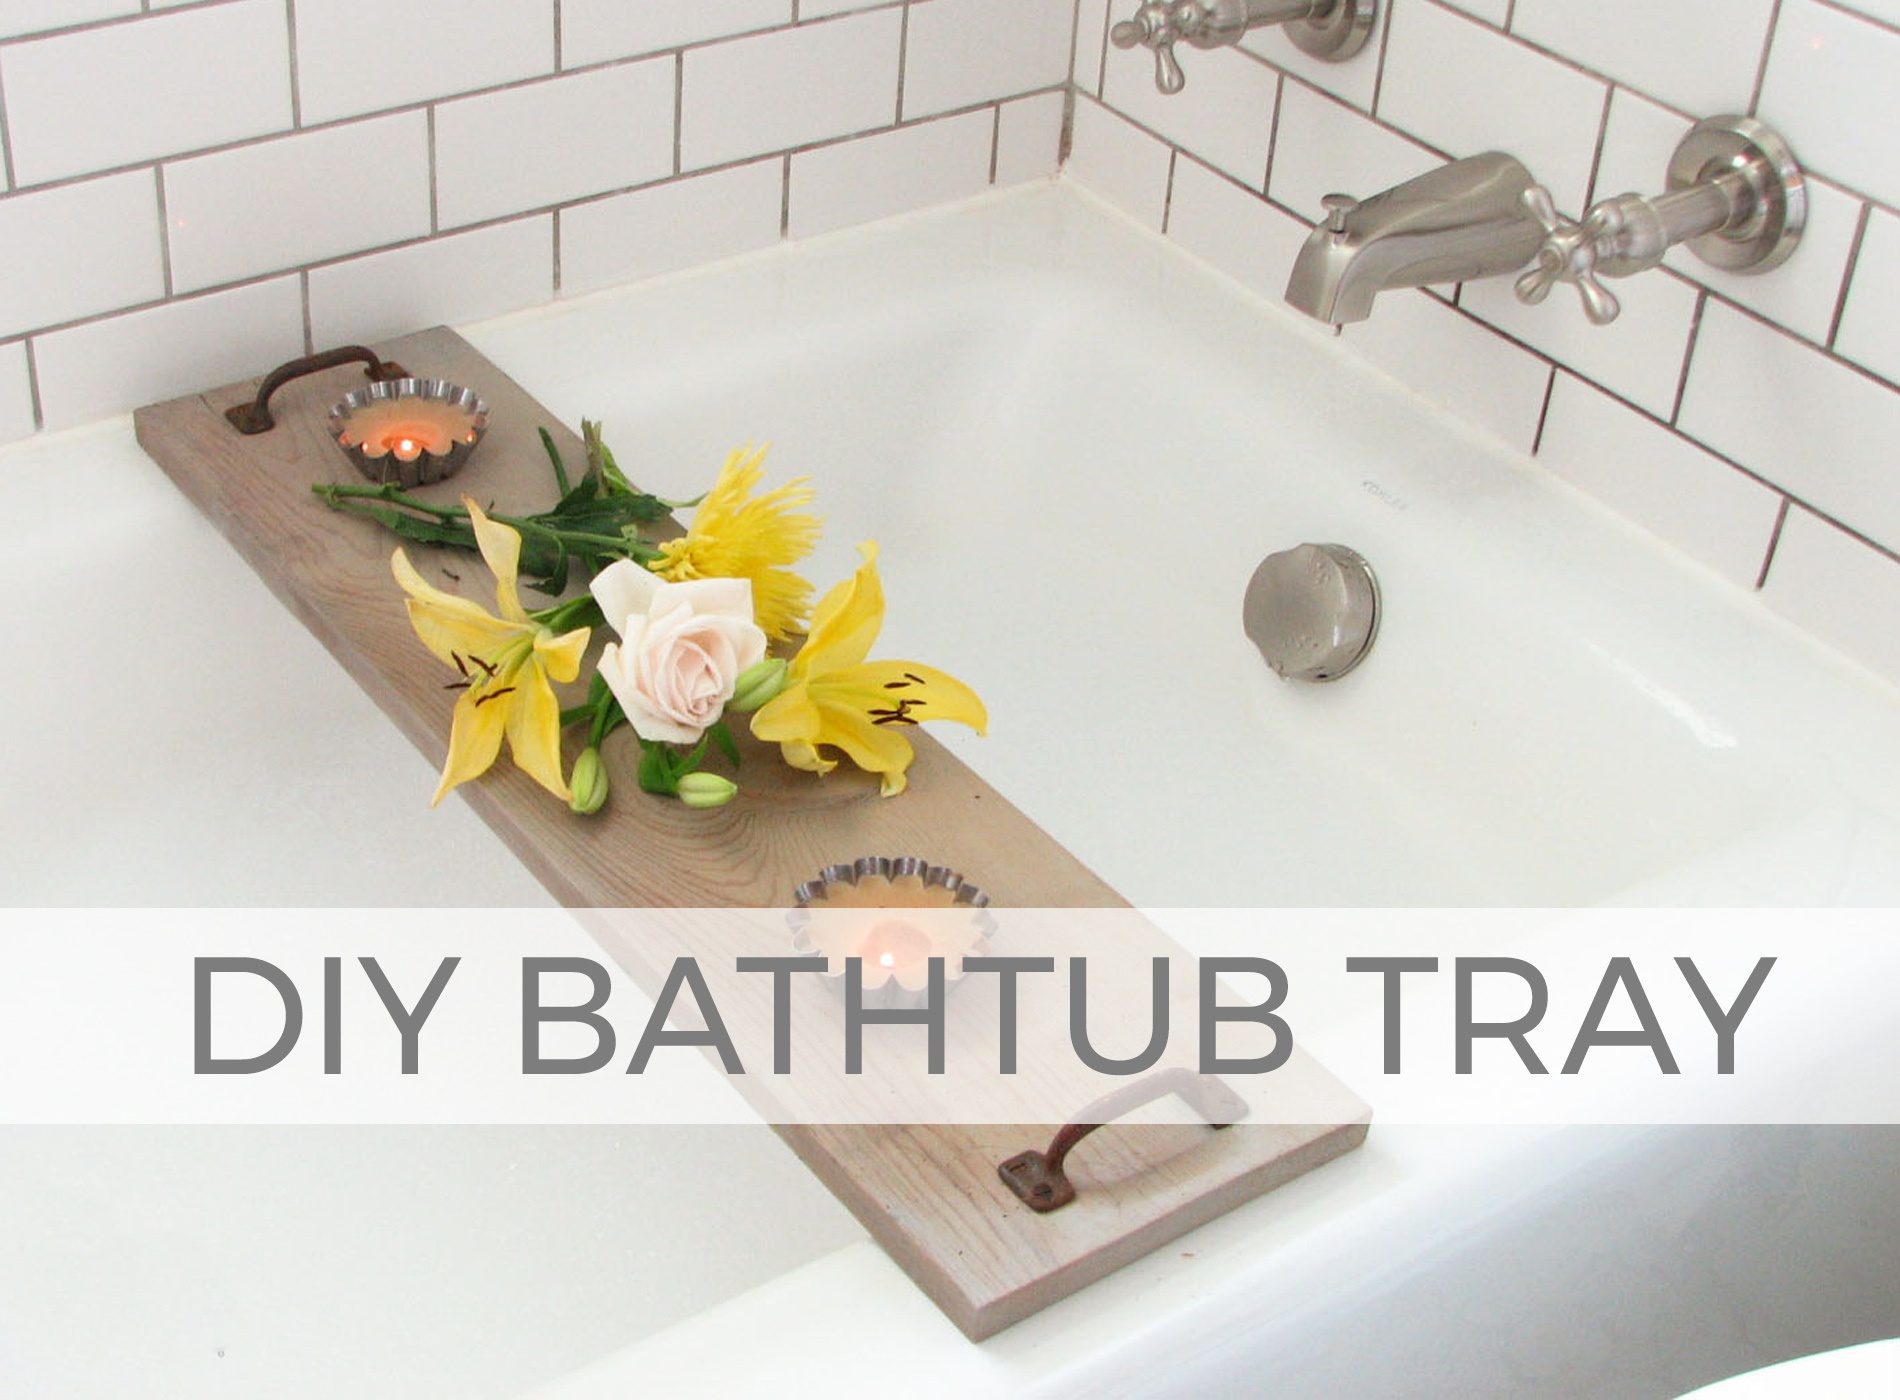 Create a gift that keeps giving ~ a DIY Bathtub Tray | Two styles defined in this tutorial by Larissa of Prodigal Pieces | prodigalpieces.com #prodigalpieces